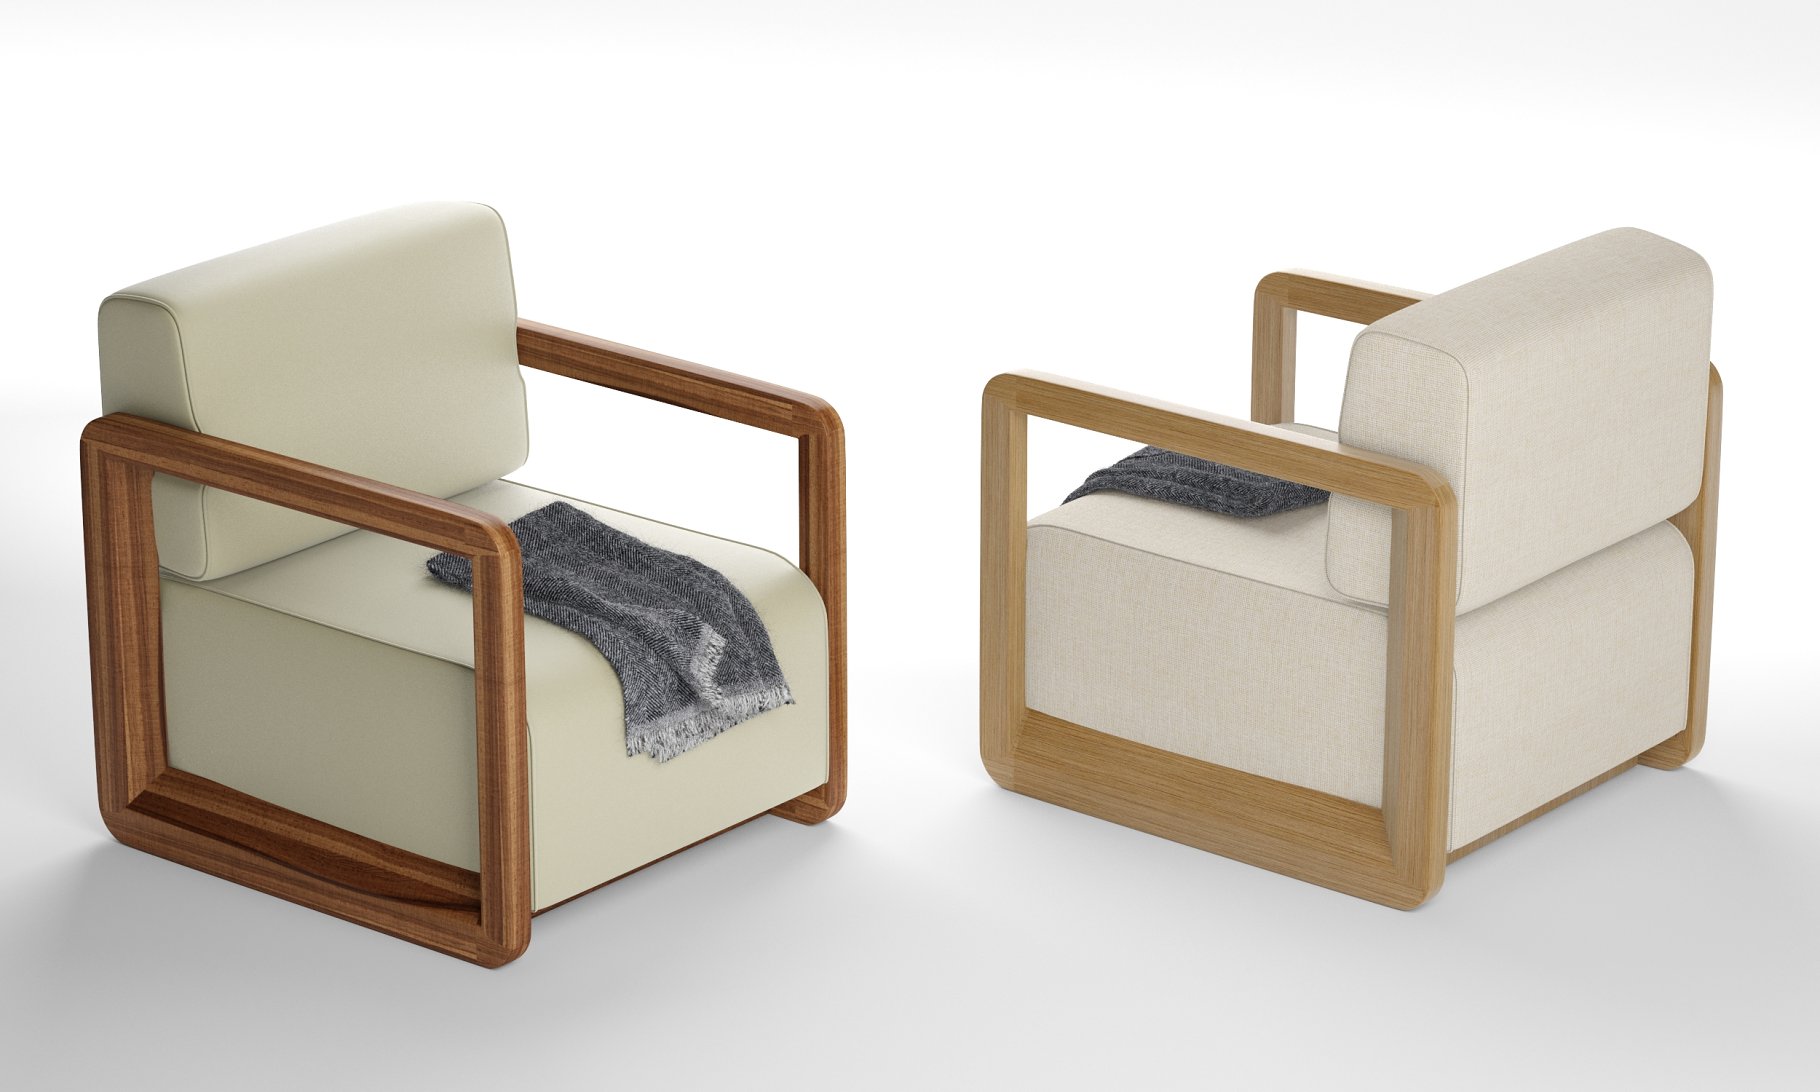 Rendering of a wonderful 3d model of an upholstered armchair